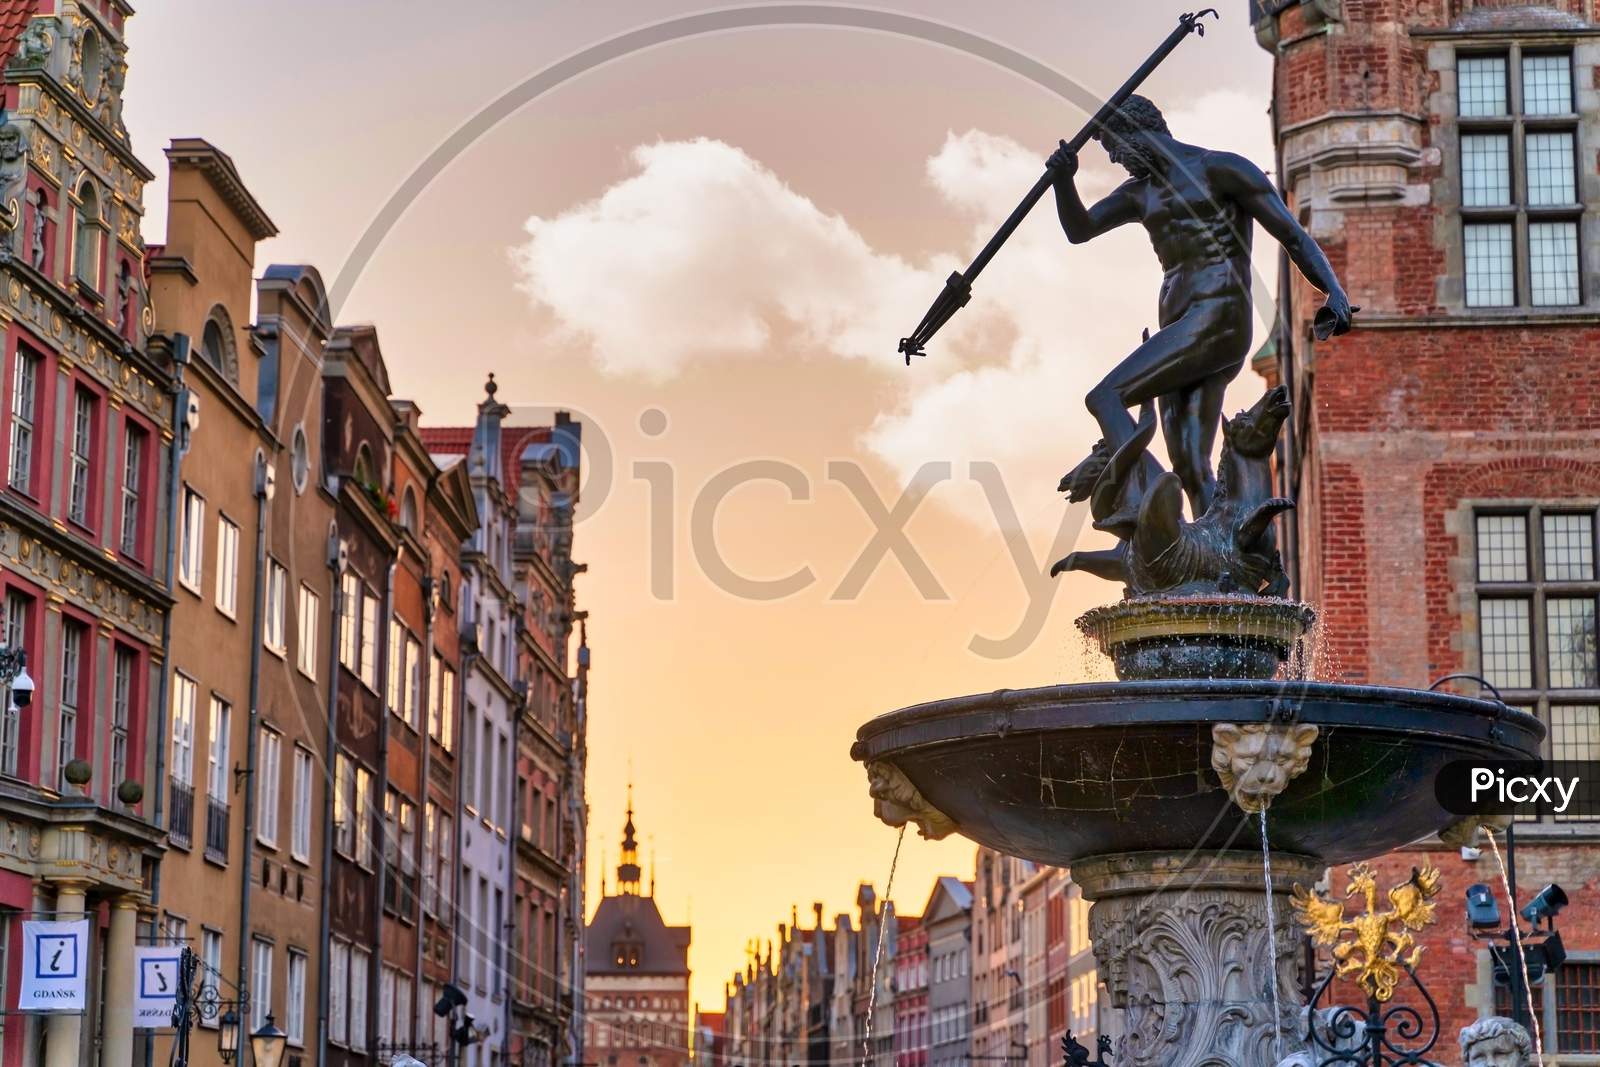 Gdansk, North Poland - August 15, 2020: Wide Angle Shot Of Famous Touristic Attraction Of Neptune'S Fountain Located At The City Center Main Square Of Old Town Against Dramatic Sky